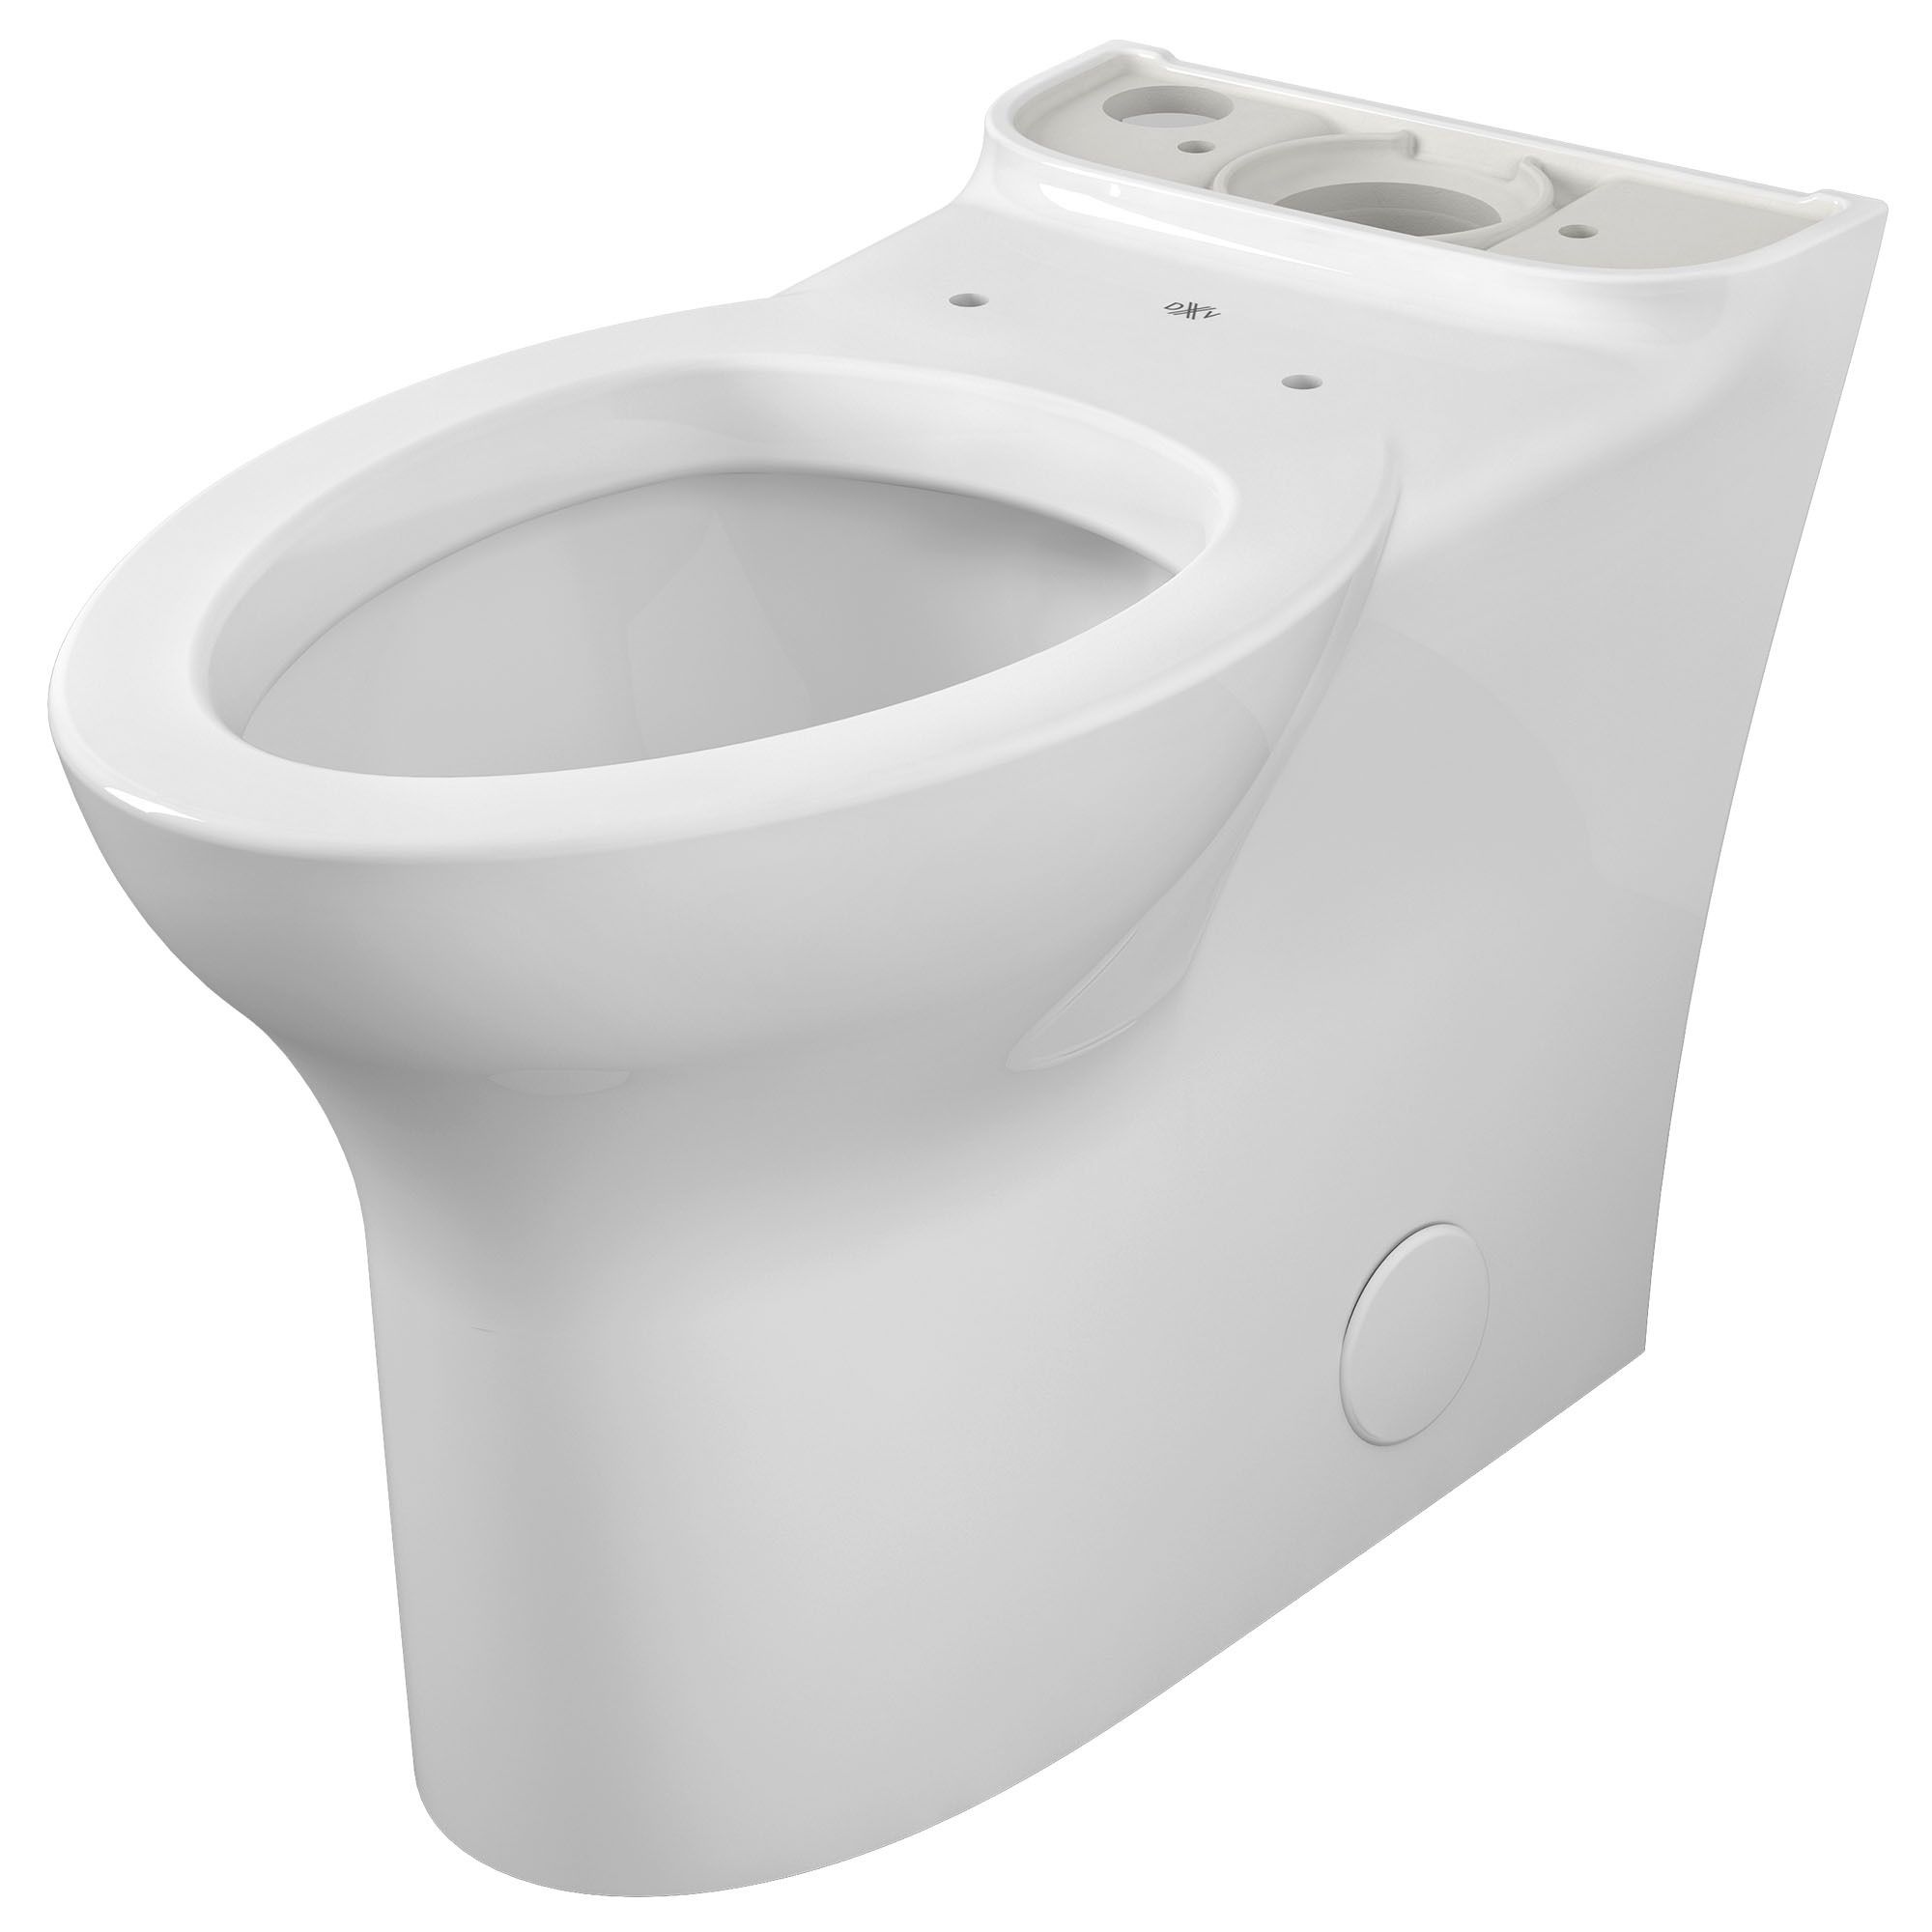 Equility® Chair Height Elongated Toilet Bowl with Seat